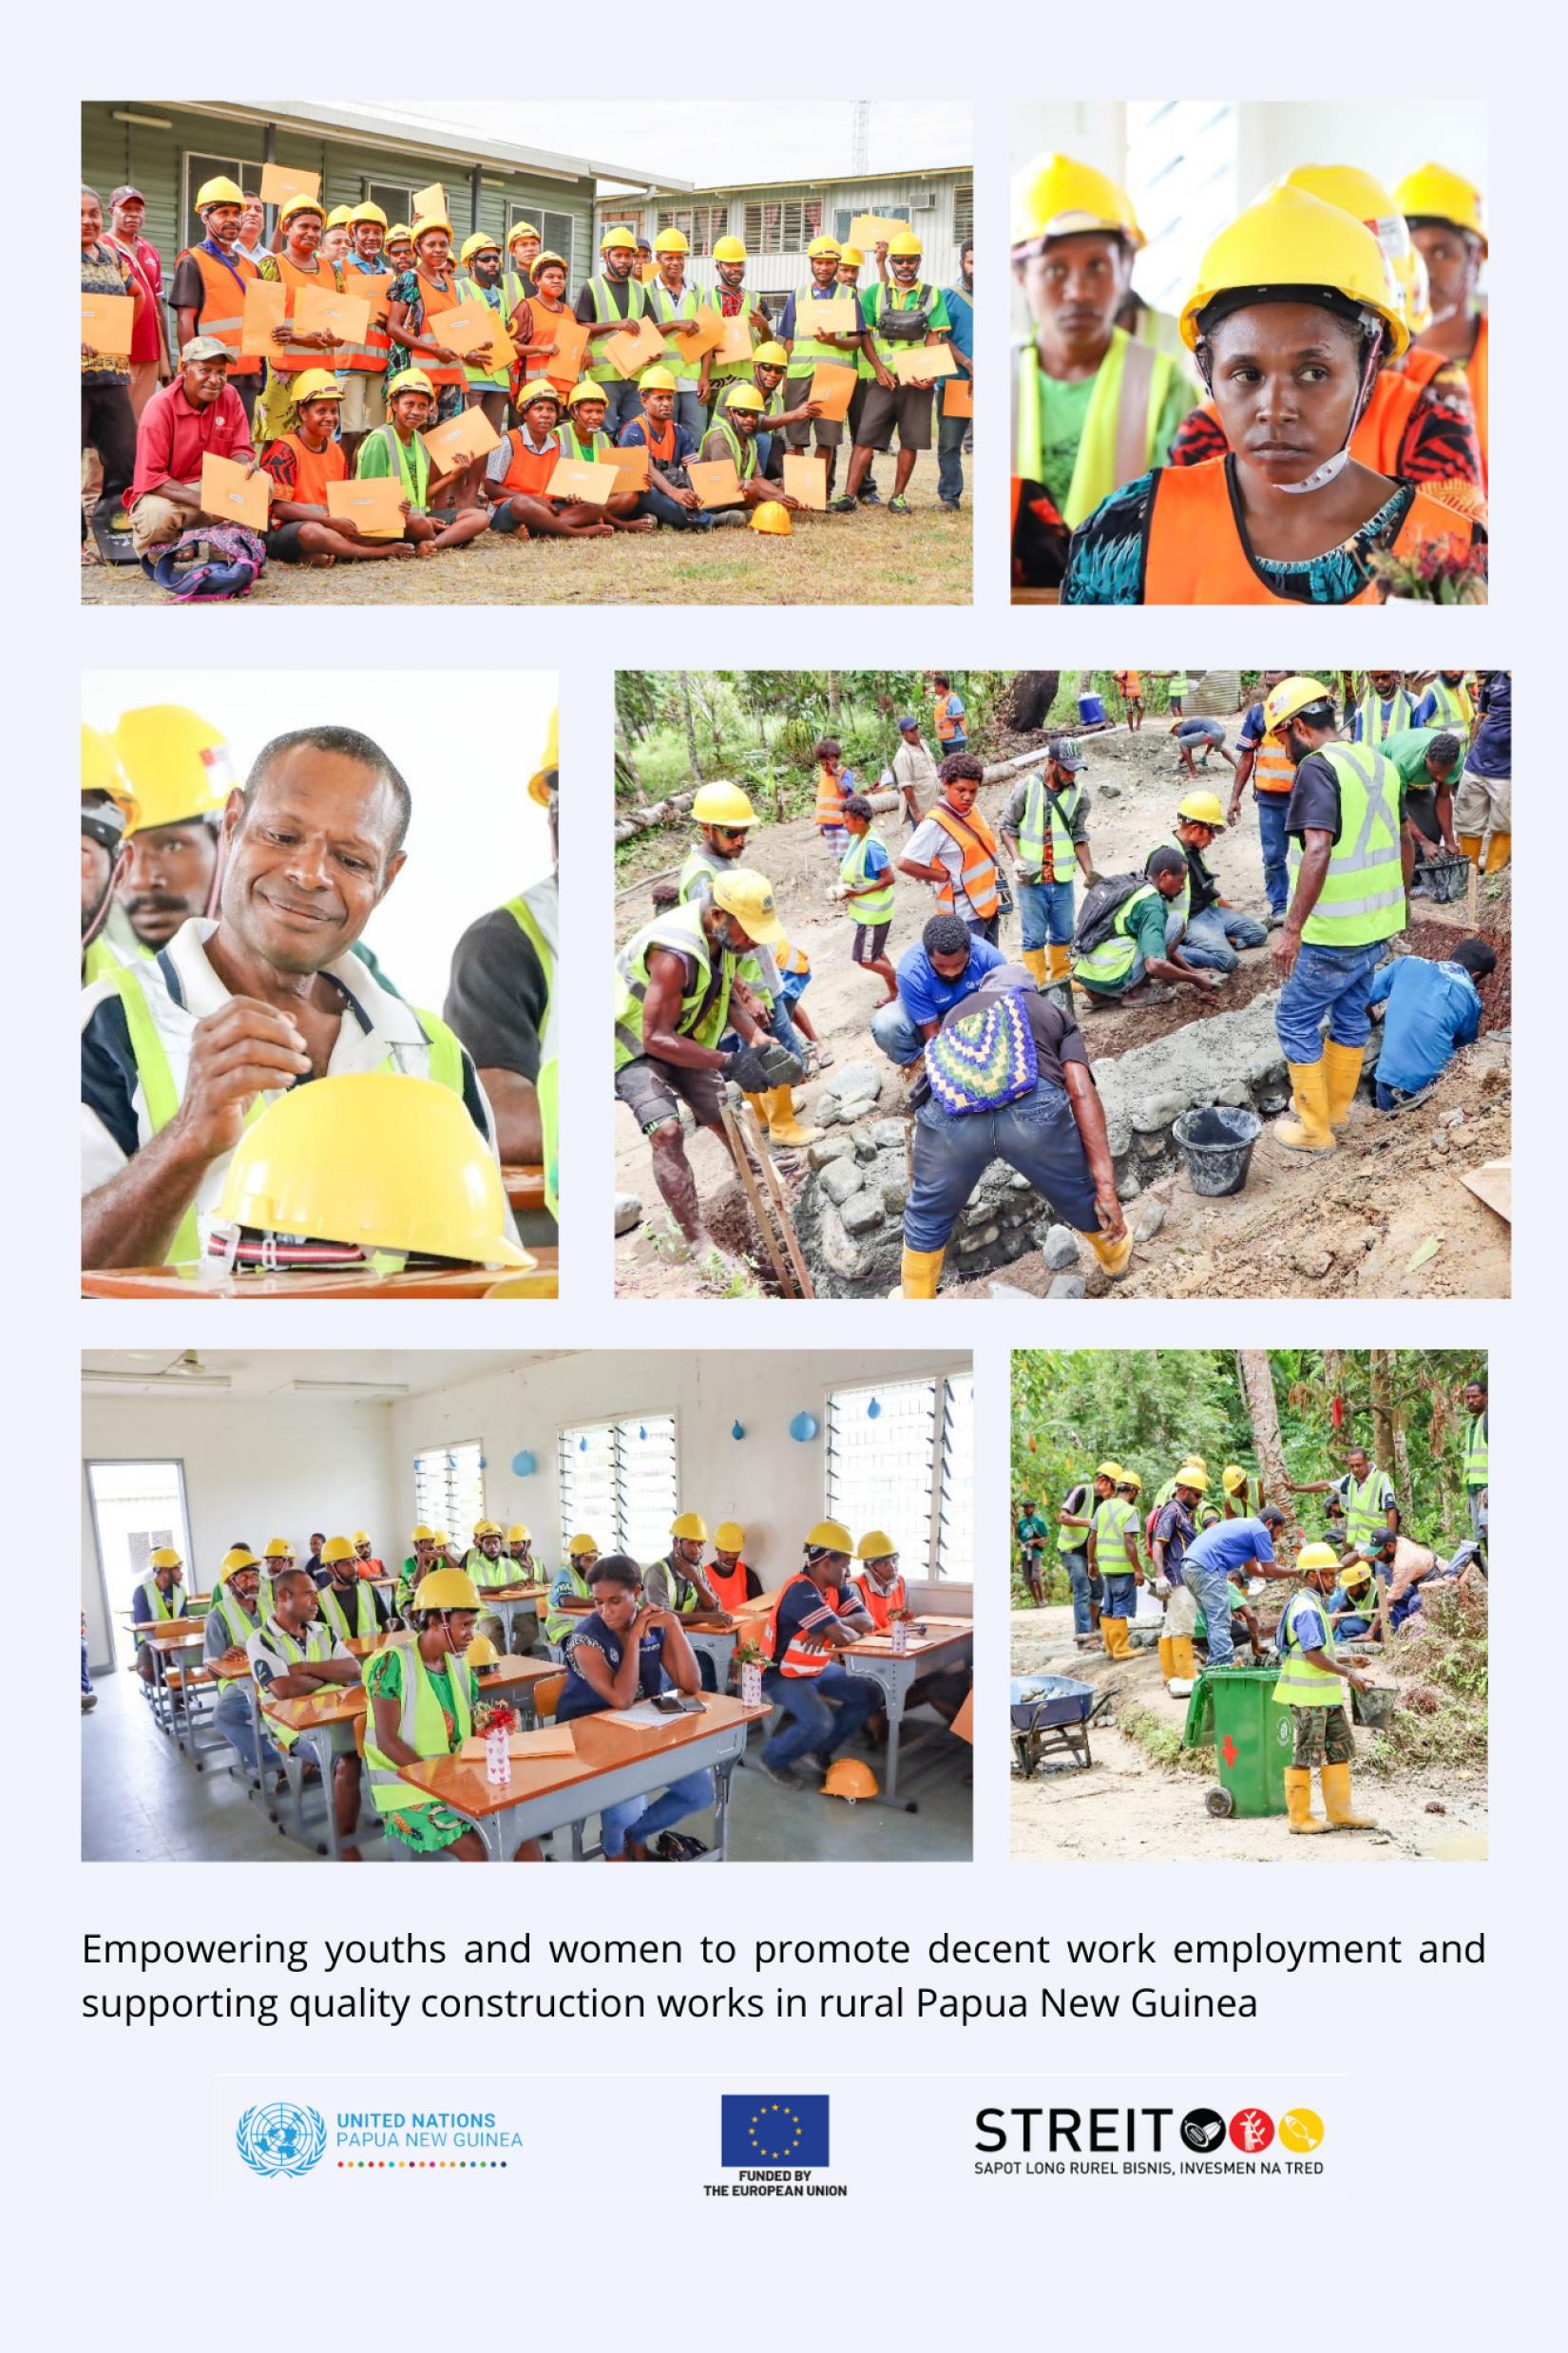 Empowering youths and women to promote decent work employment and supporting quality construction works in rural Papua New Guinea  